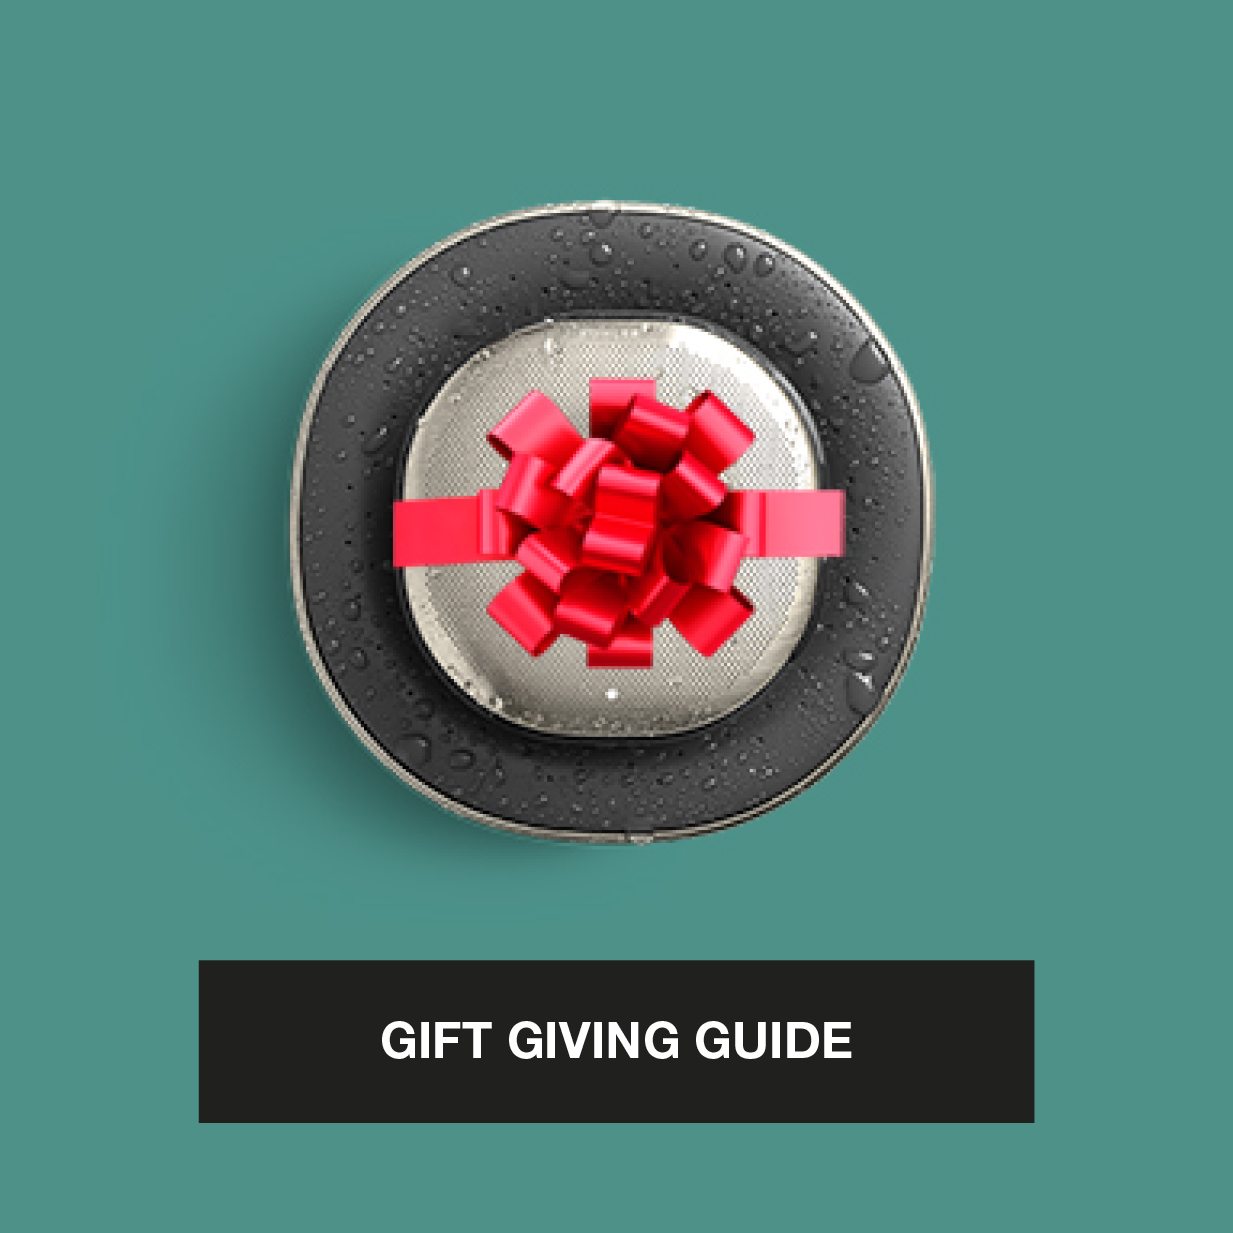 HOLIDAY GIFT GUIDE 2020